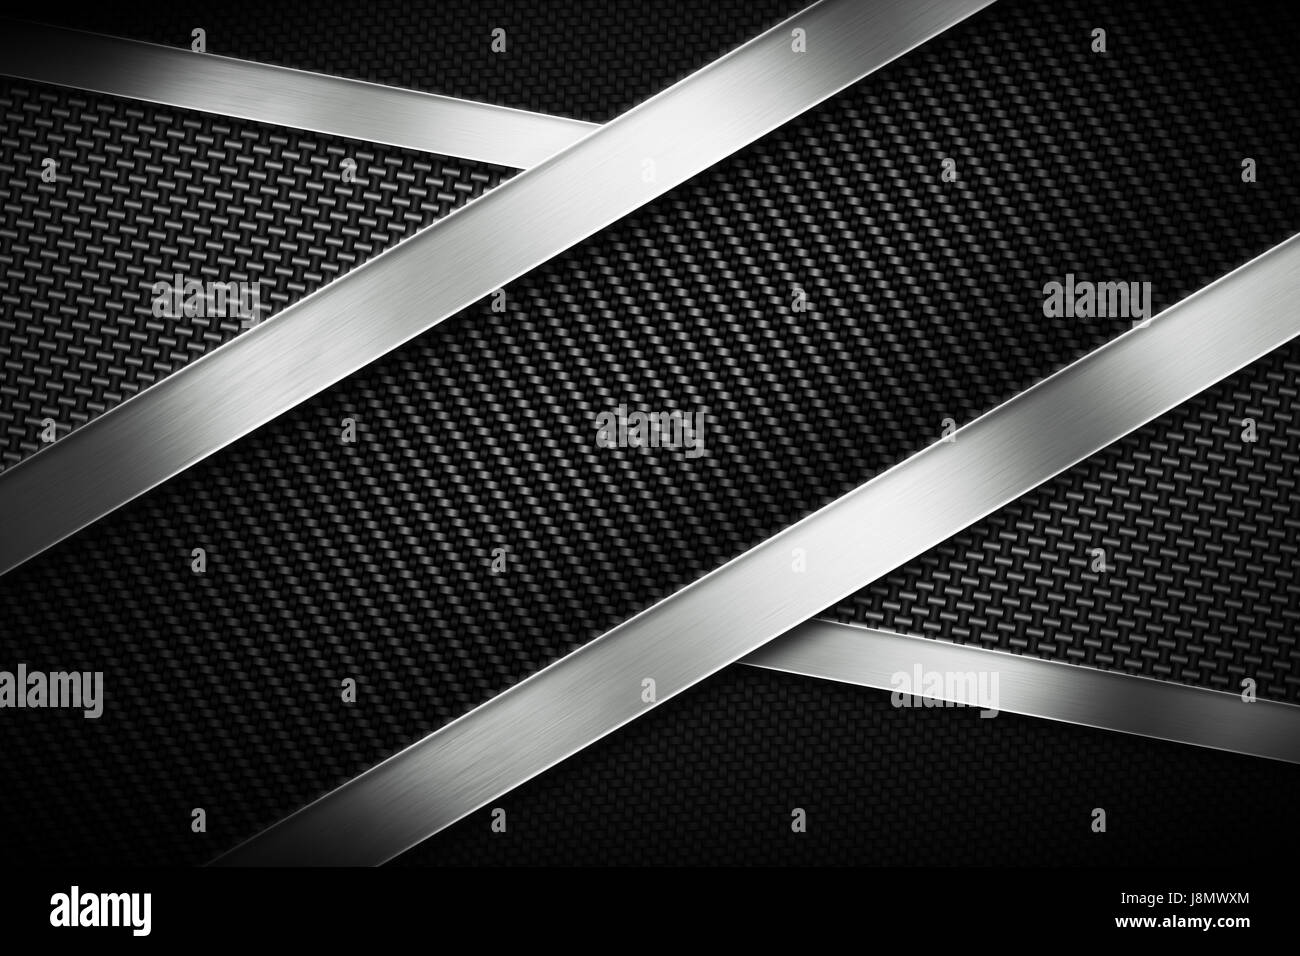 Three types of modern carbon fiber with polish metal plate texture material design for background, wallpaper, graphic design Stock Photo